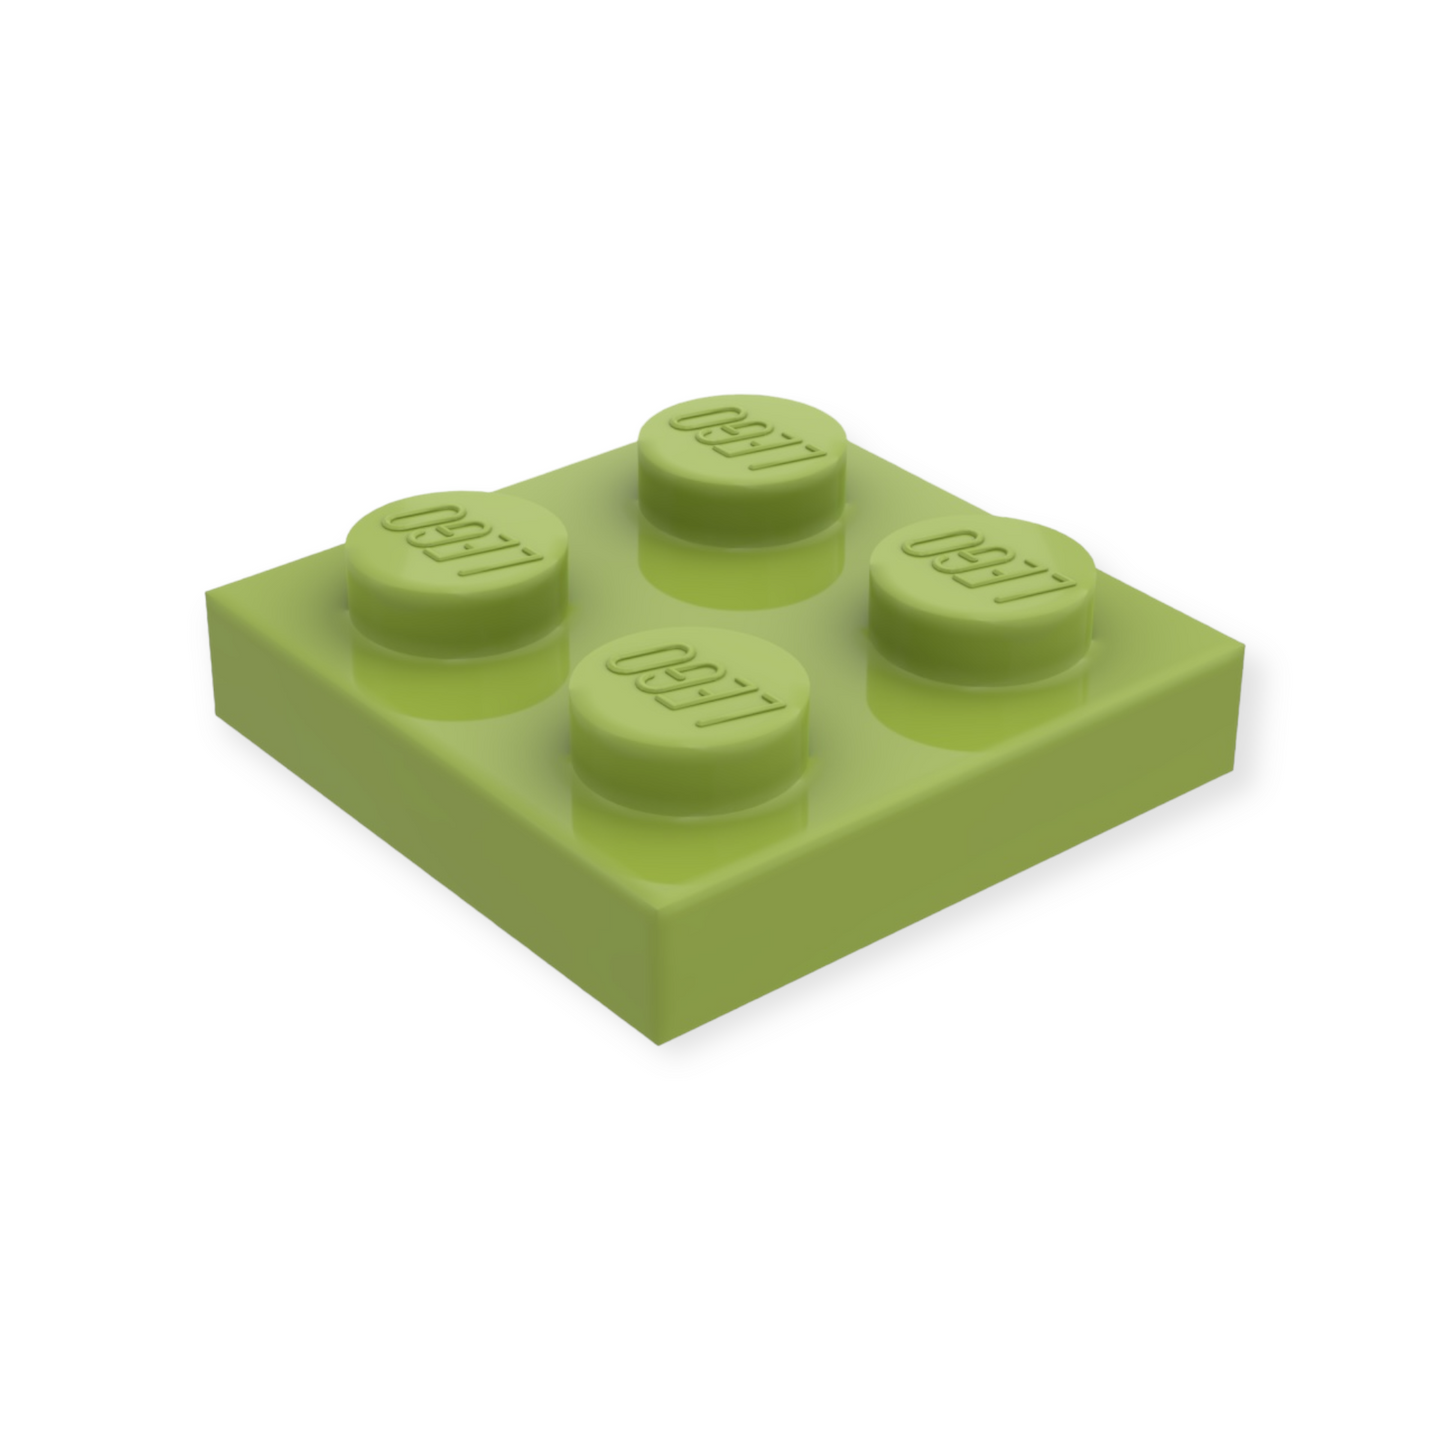 LEGO Plate 2x2 - Lime